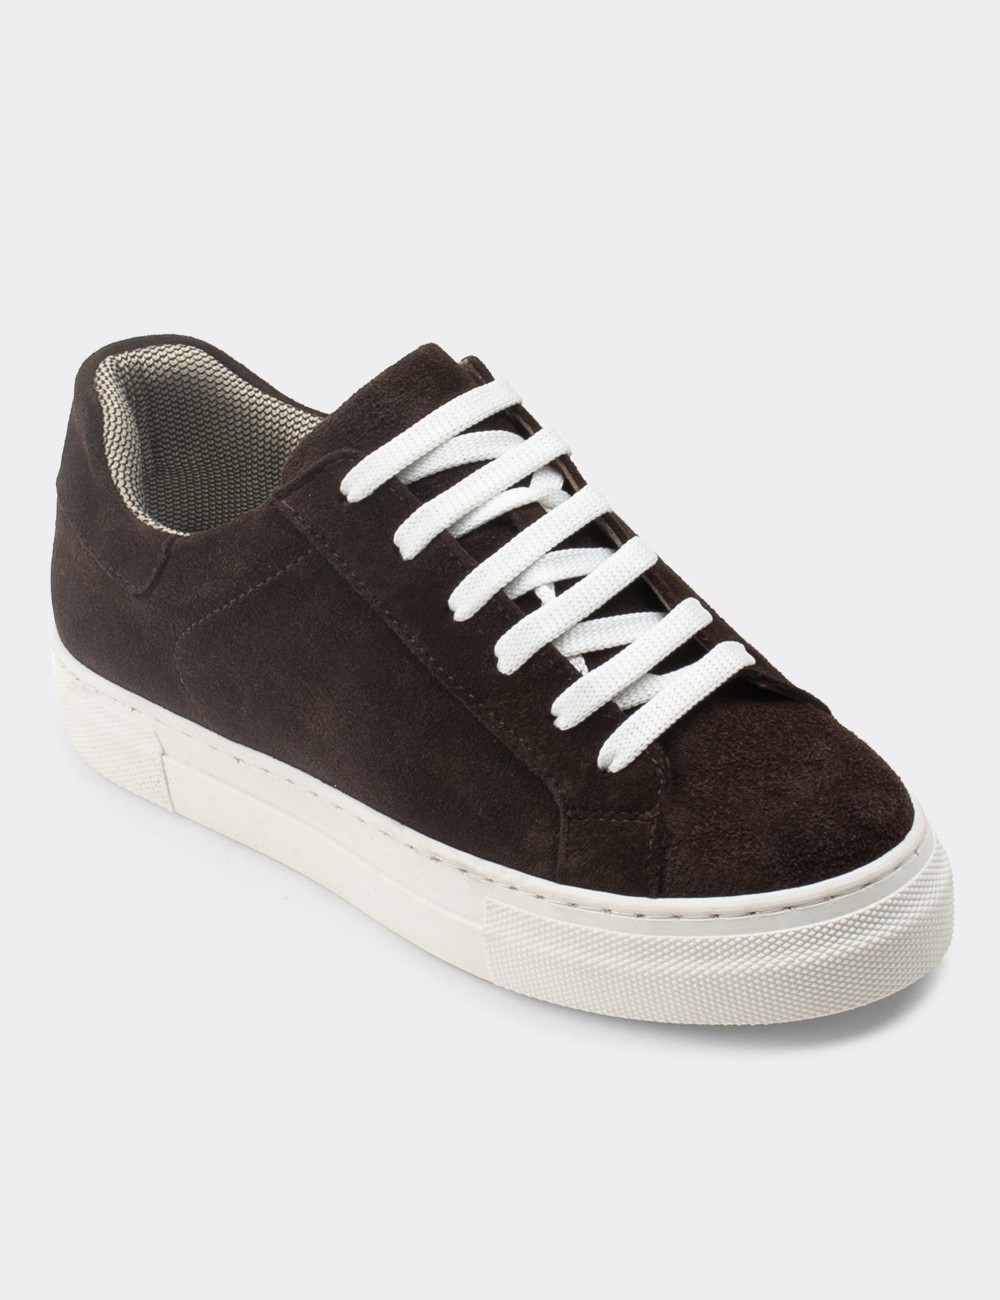 Brown Suede Leather Sneakers - Z1681ZKHVC01